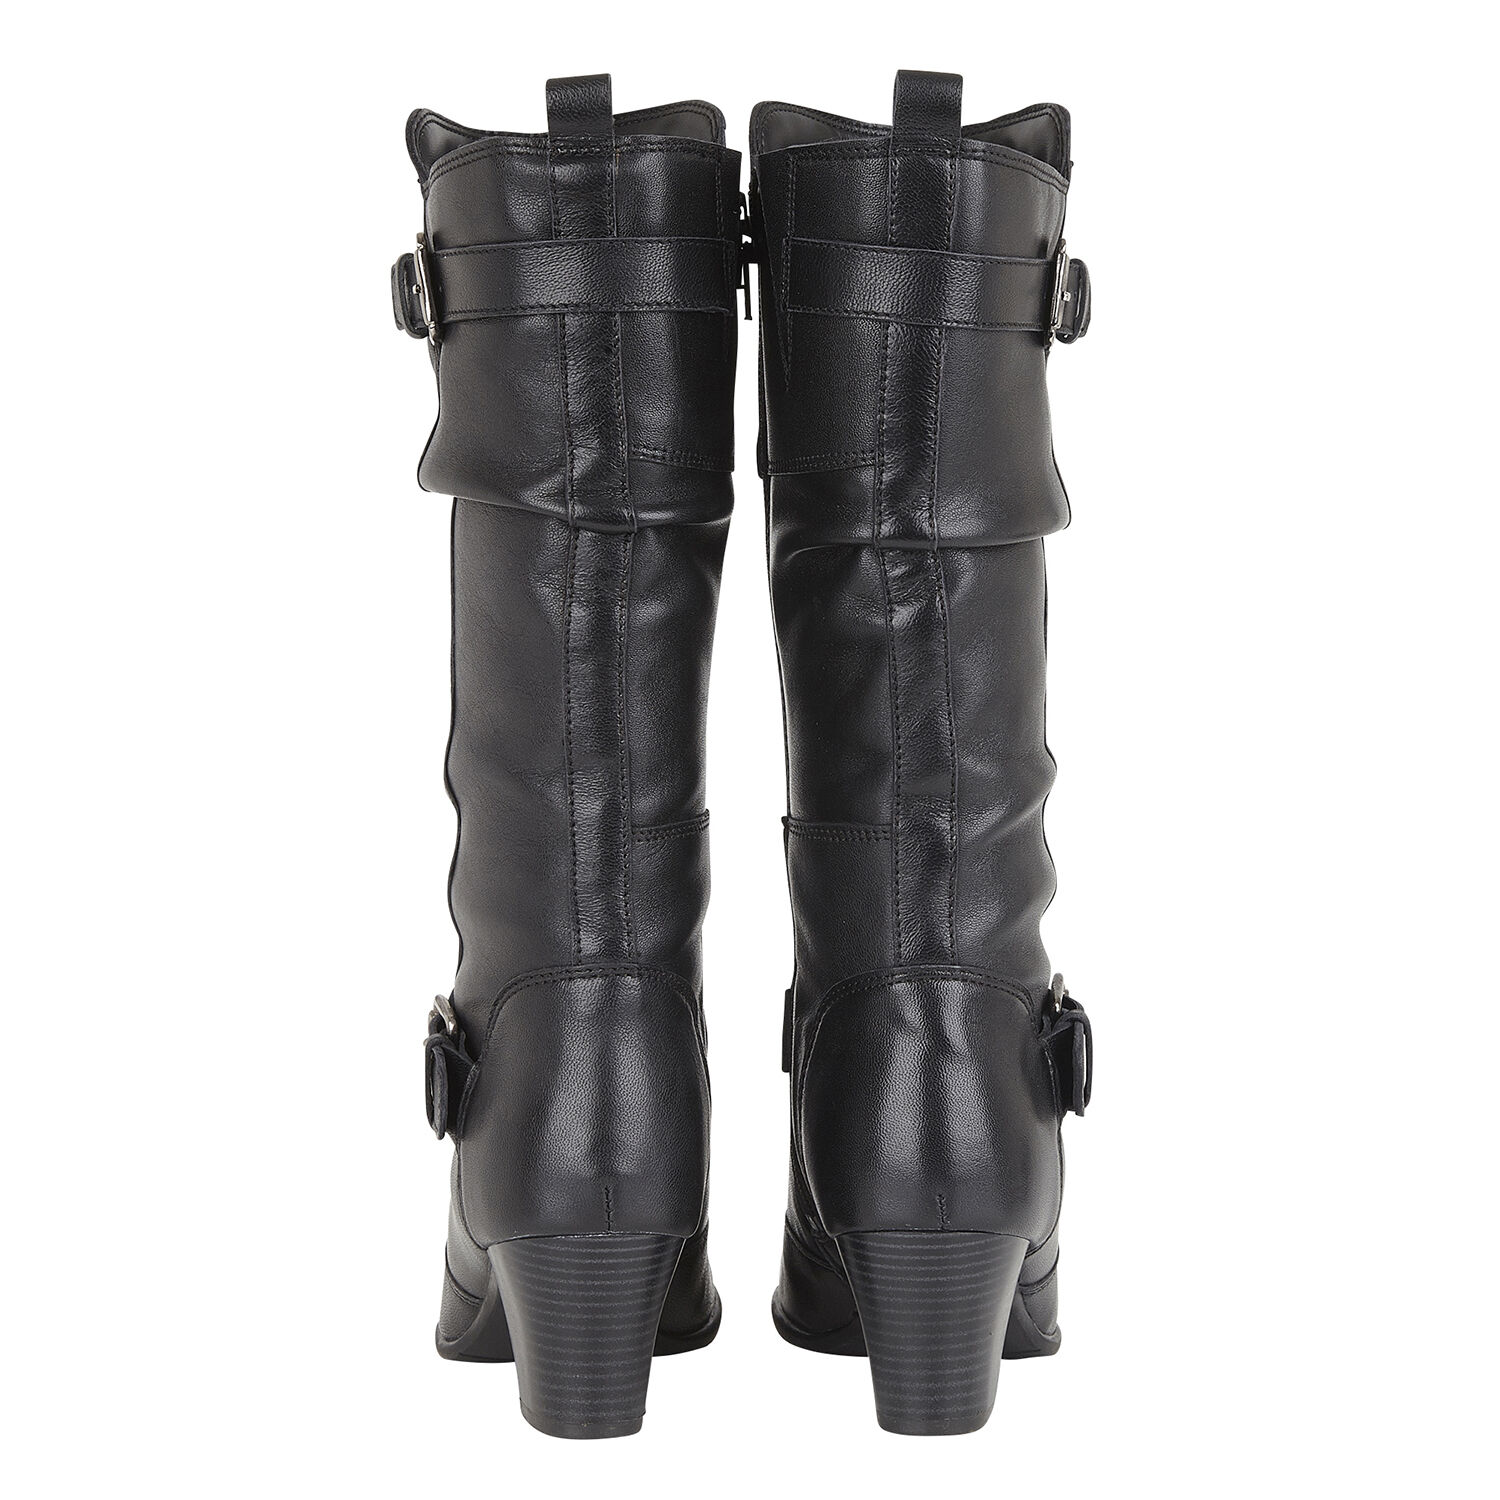 size 5 mid calf boots